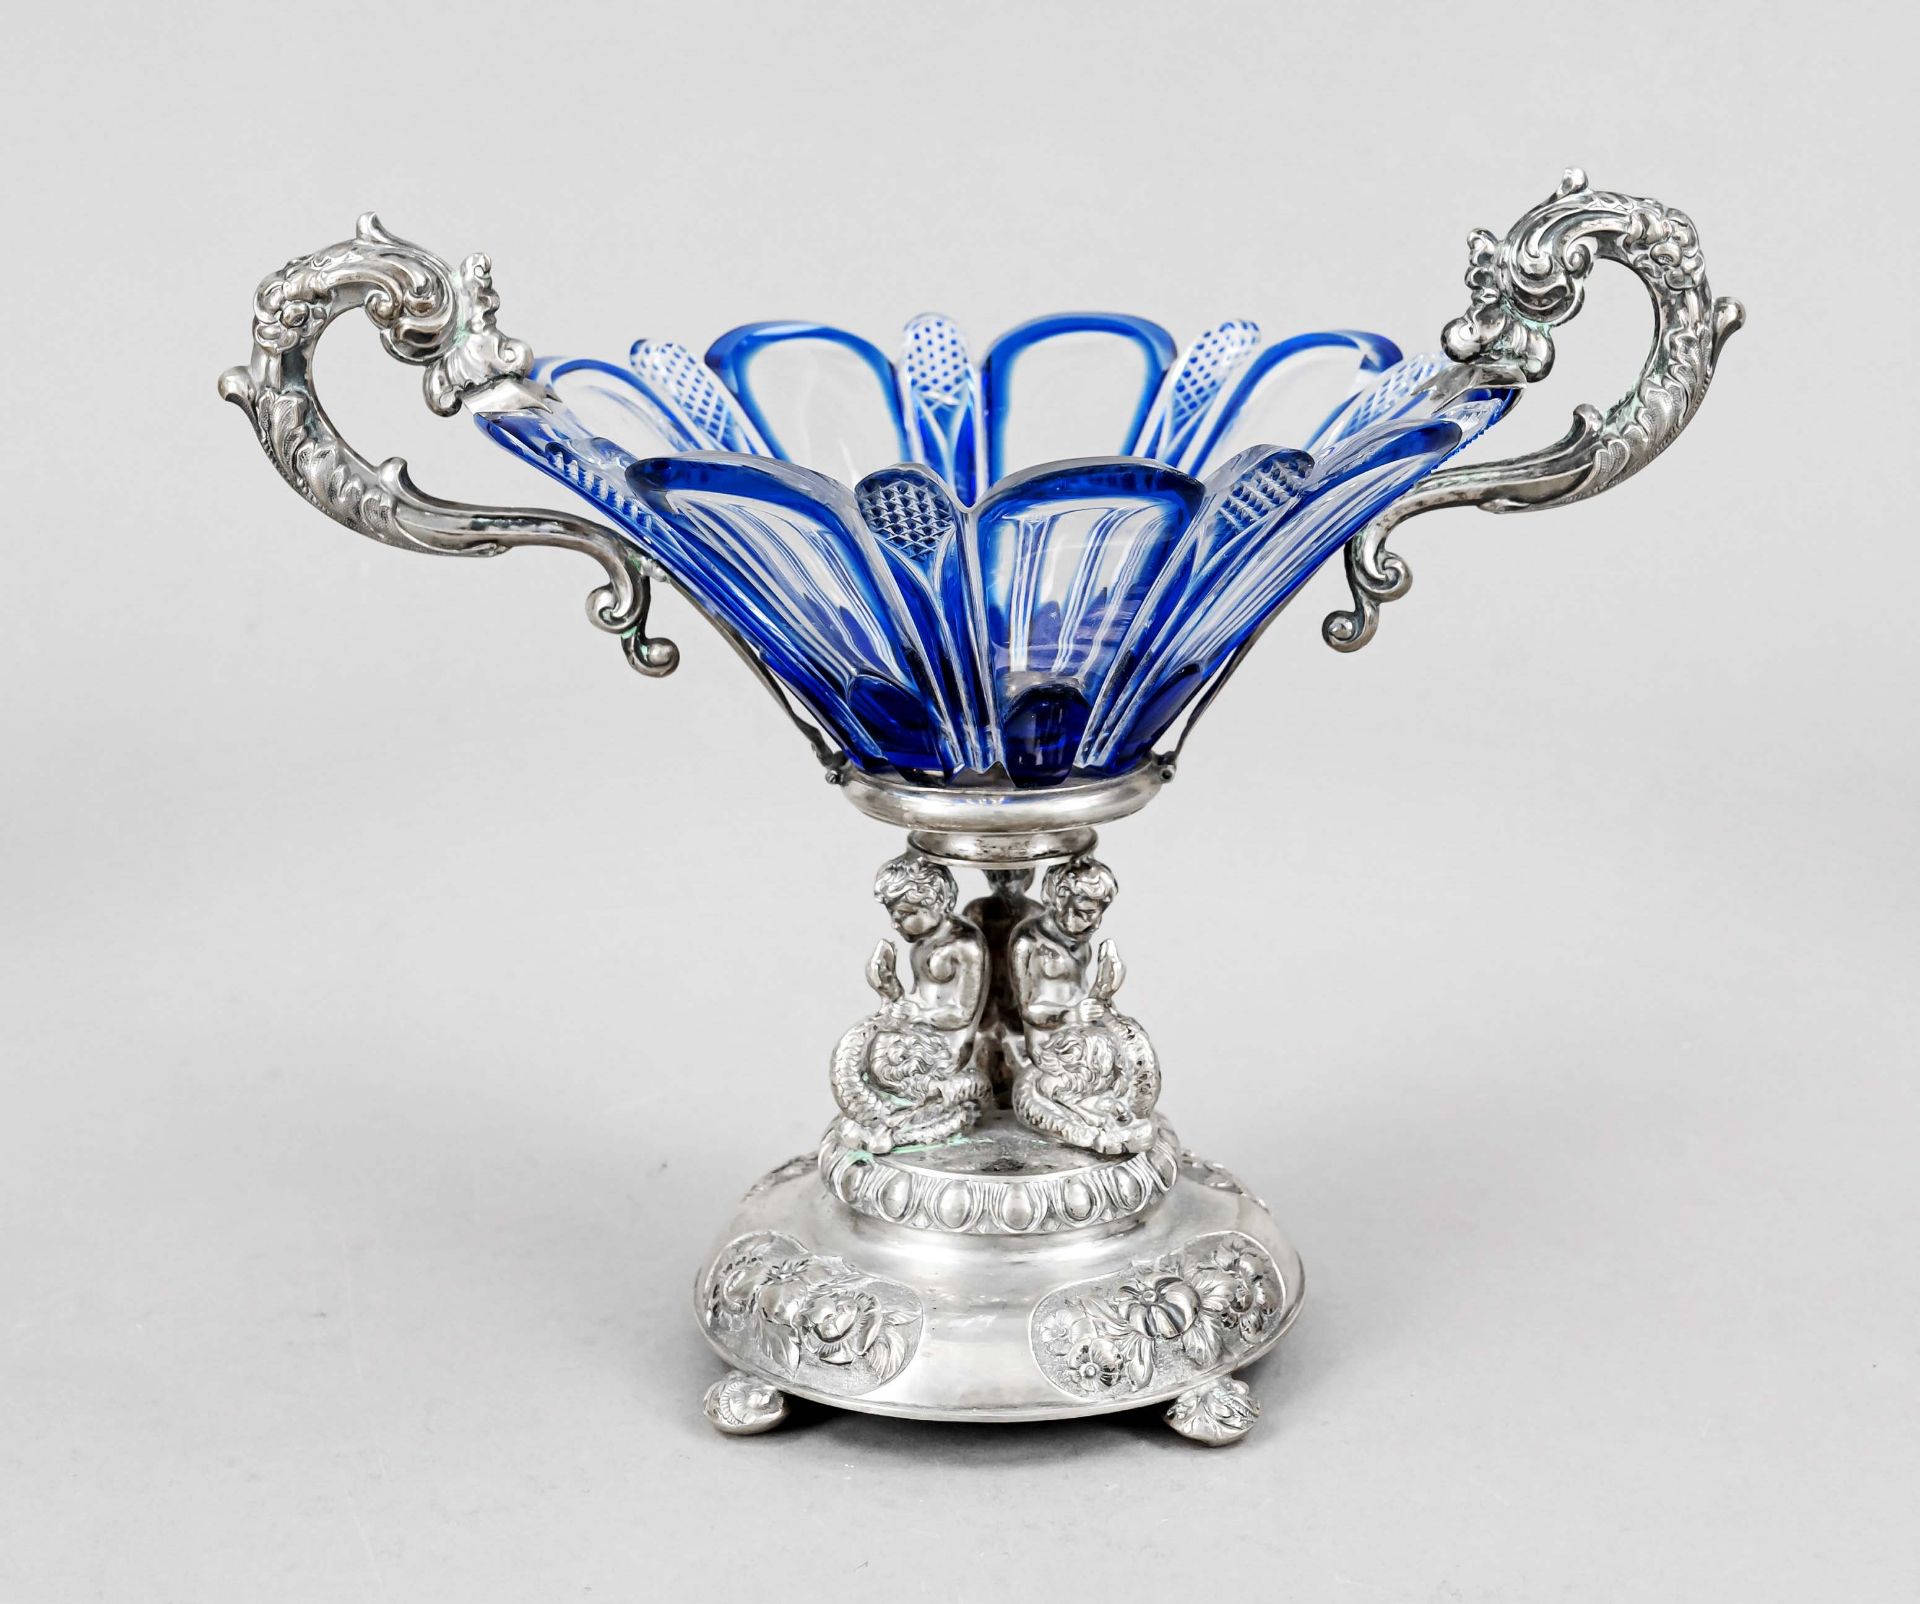 Silver mounted centerpiece, 19th century, silver tested, round domed stand with 4 depressed ball